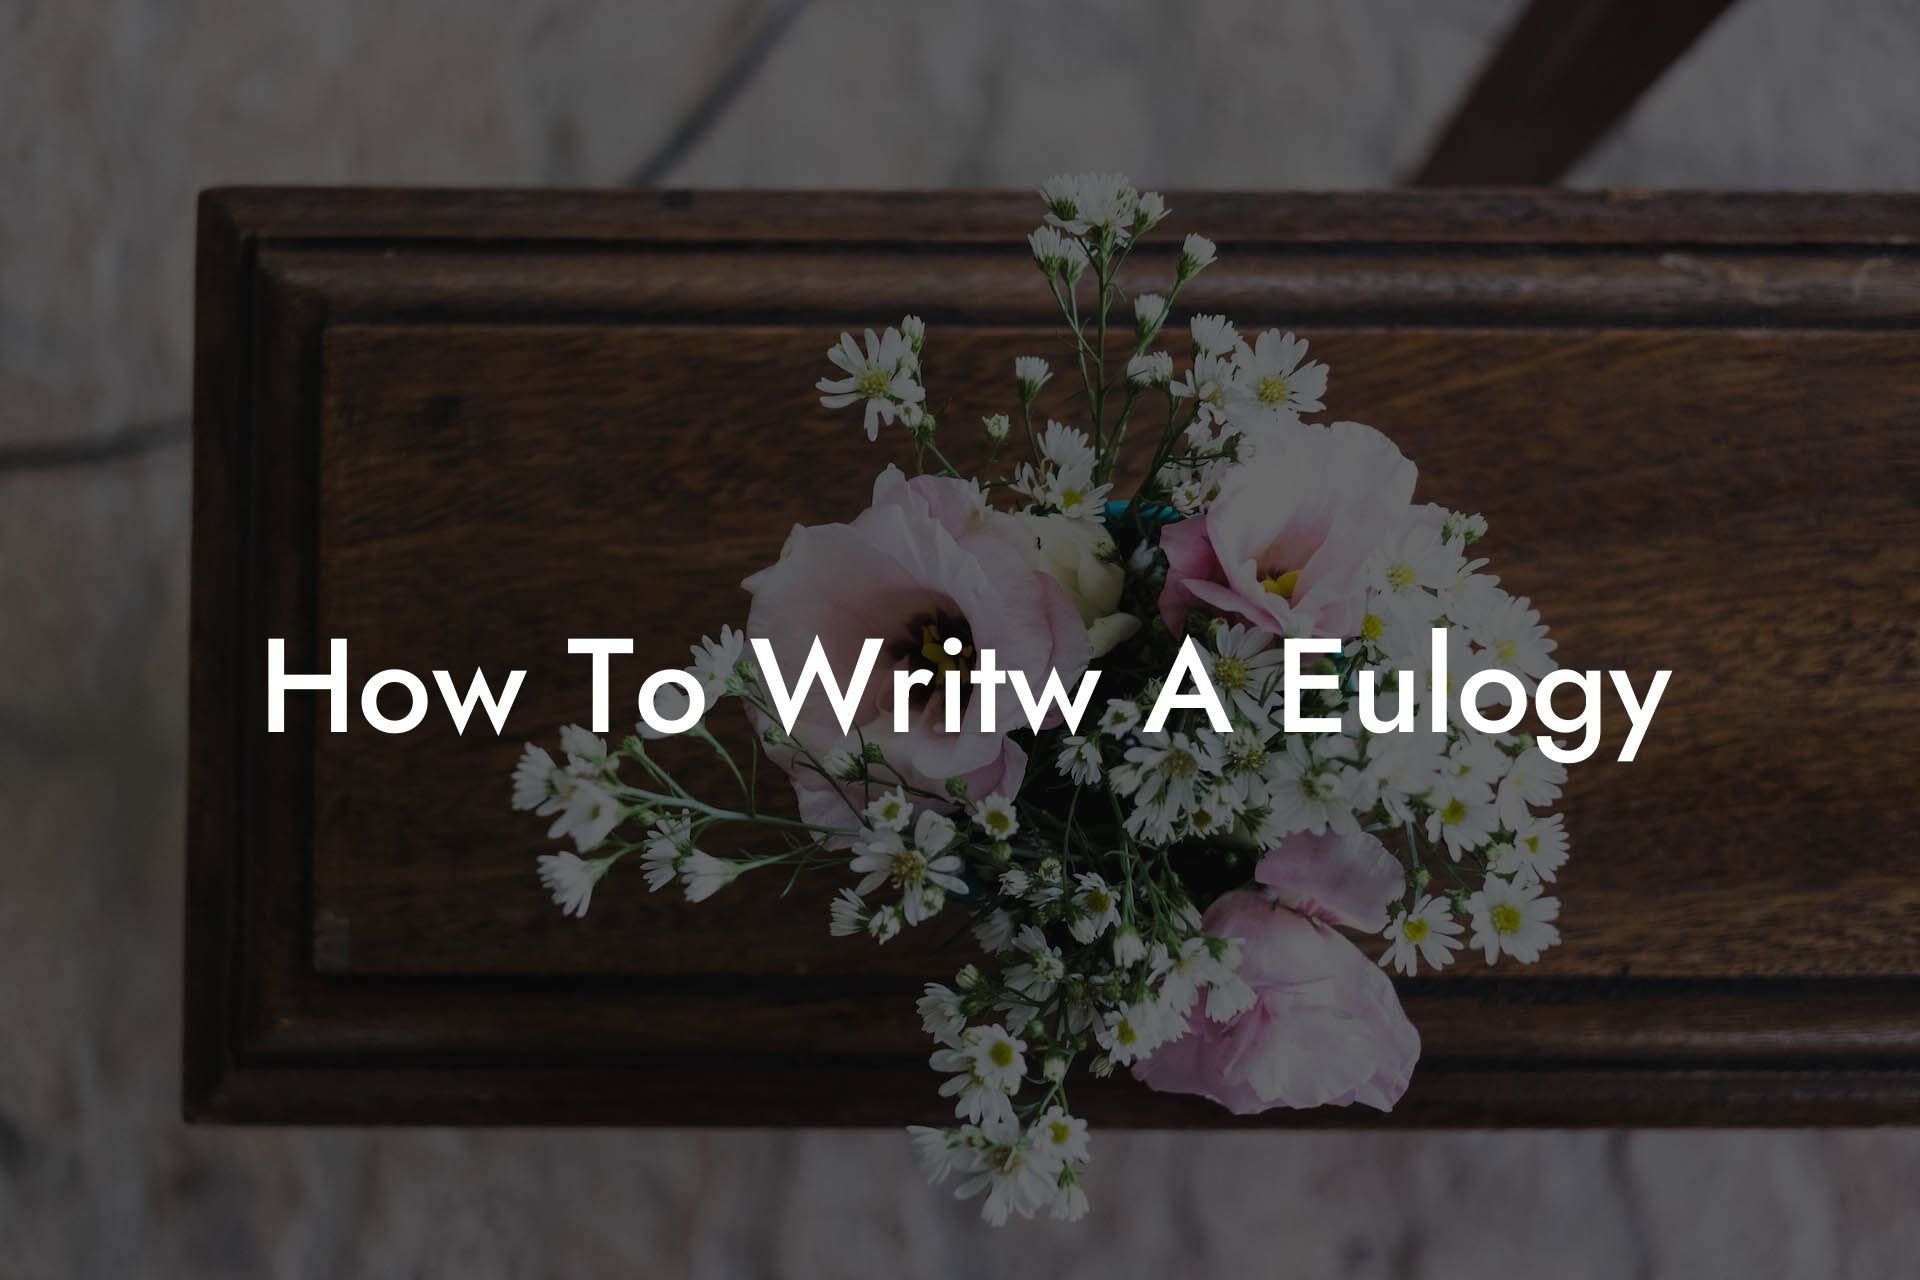 How To Writw A Eulogy